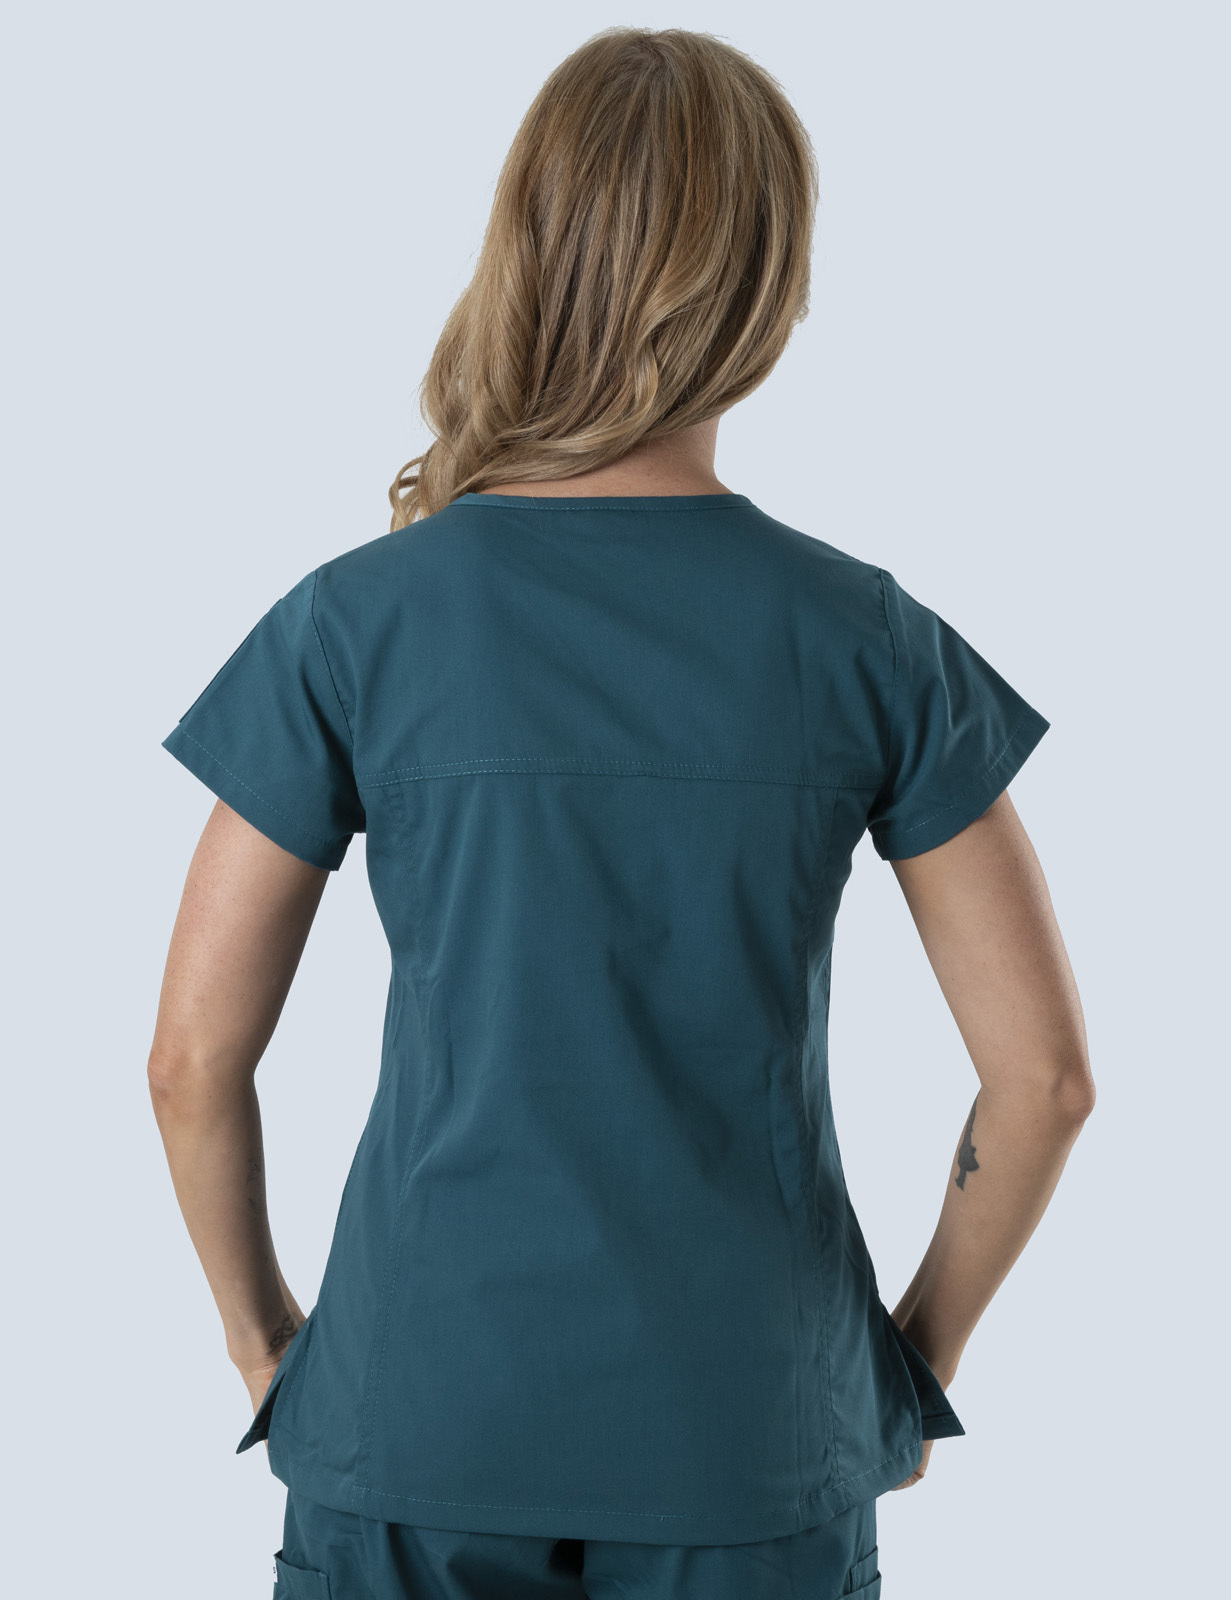 Women's Fit Solid Scrub Top - Caribbean - 3X Large - 0